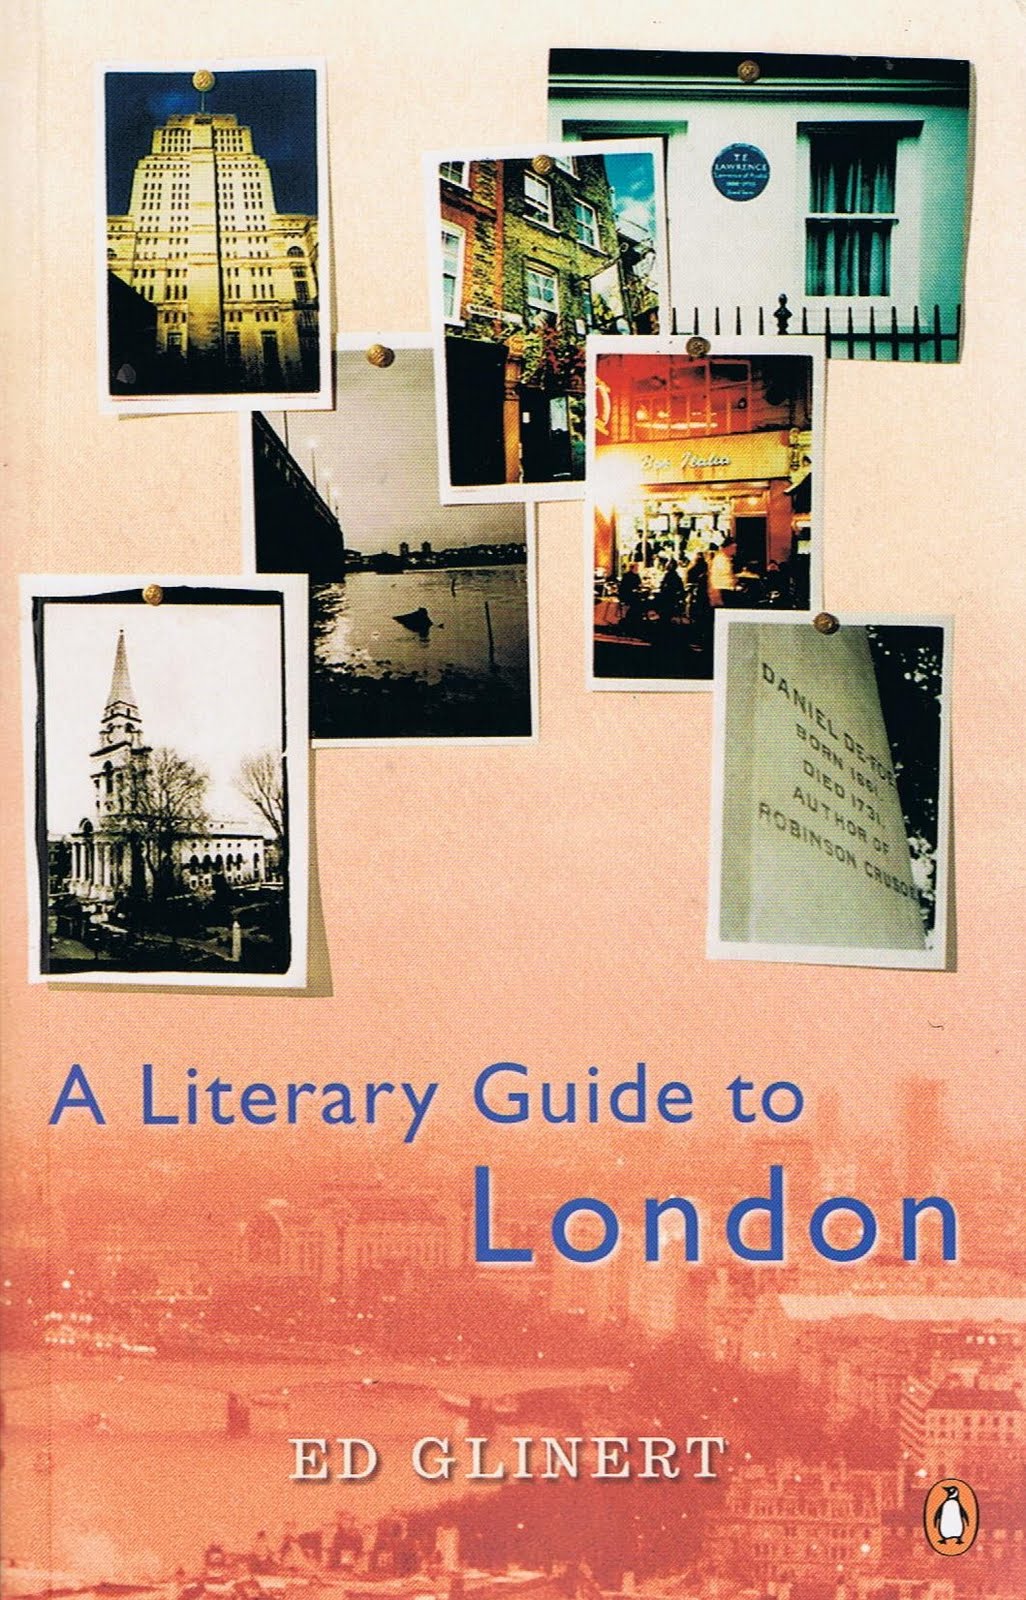 A Literary Guide to London Ed Glinert